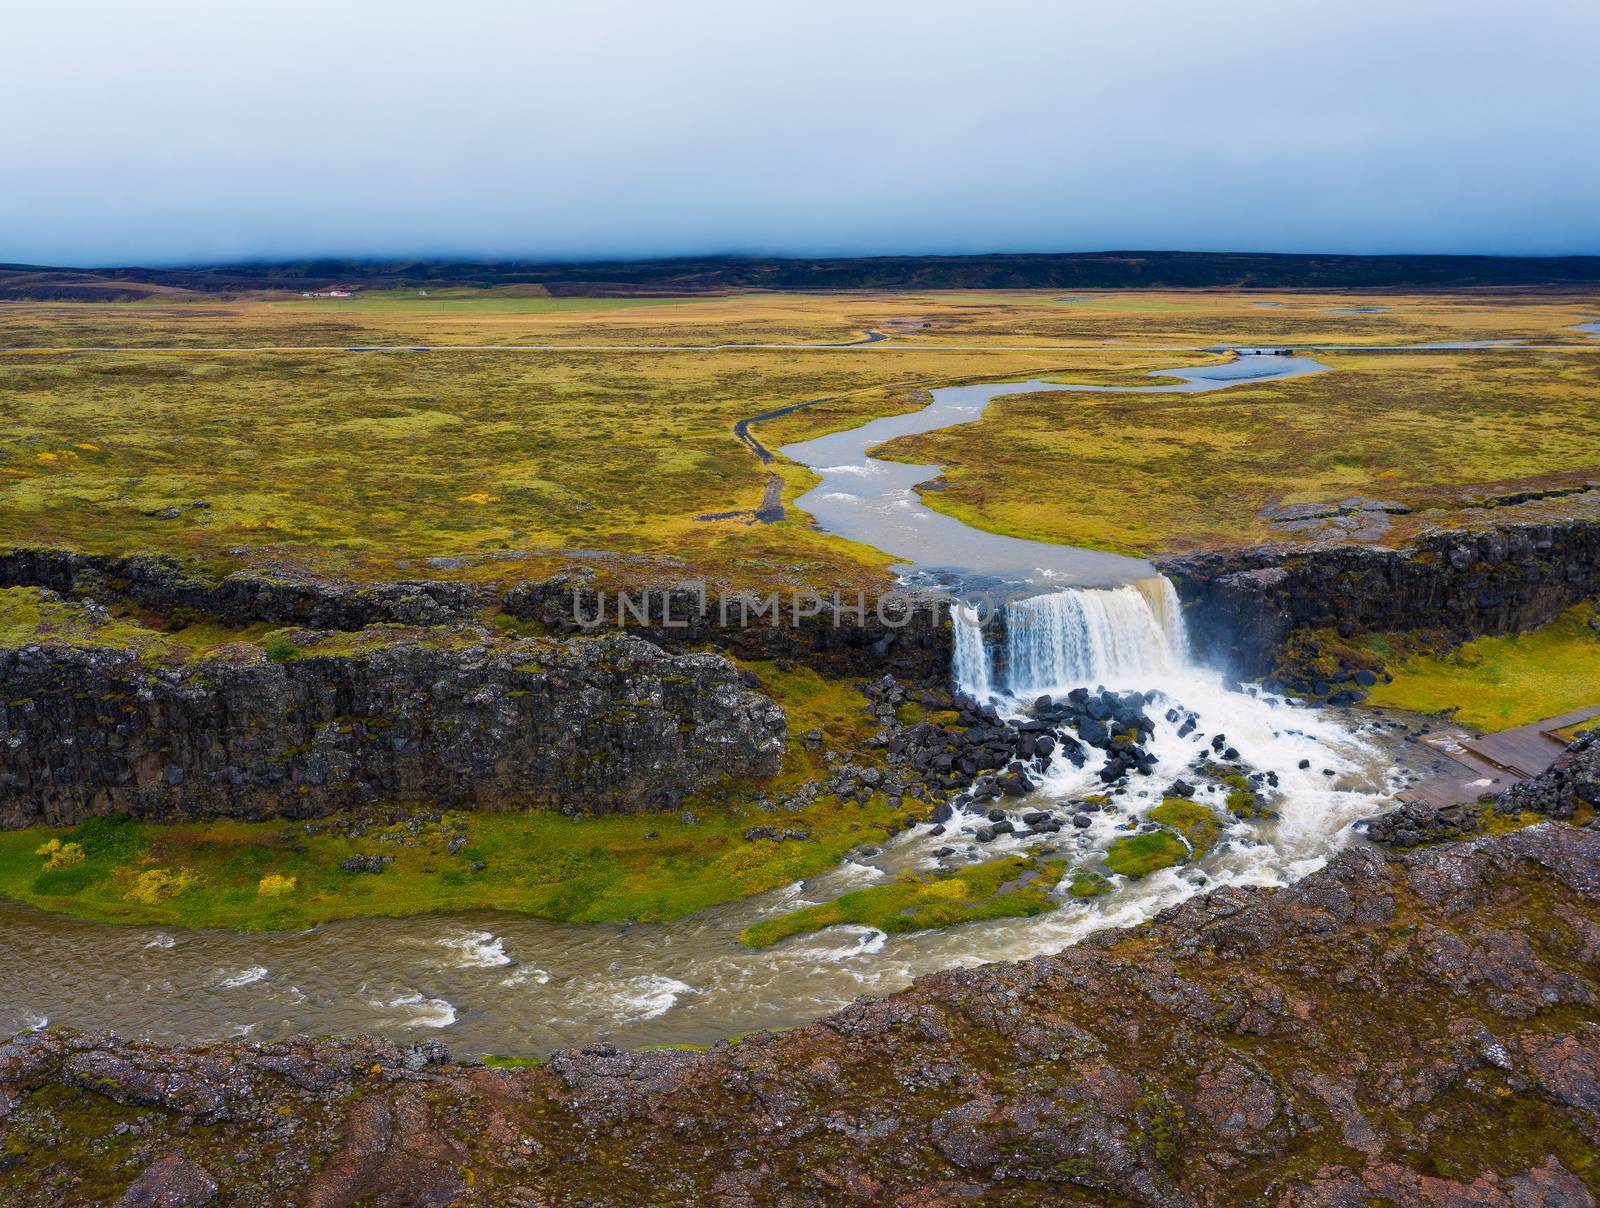 Aerial view of the Oxarafoss waterfalls in Iceland. Oxarafoss also called Oxararfoss is located in the Thingvellir National Park on the Oxara River.